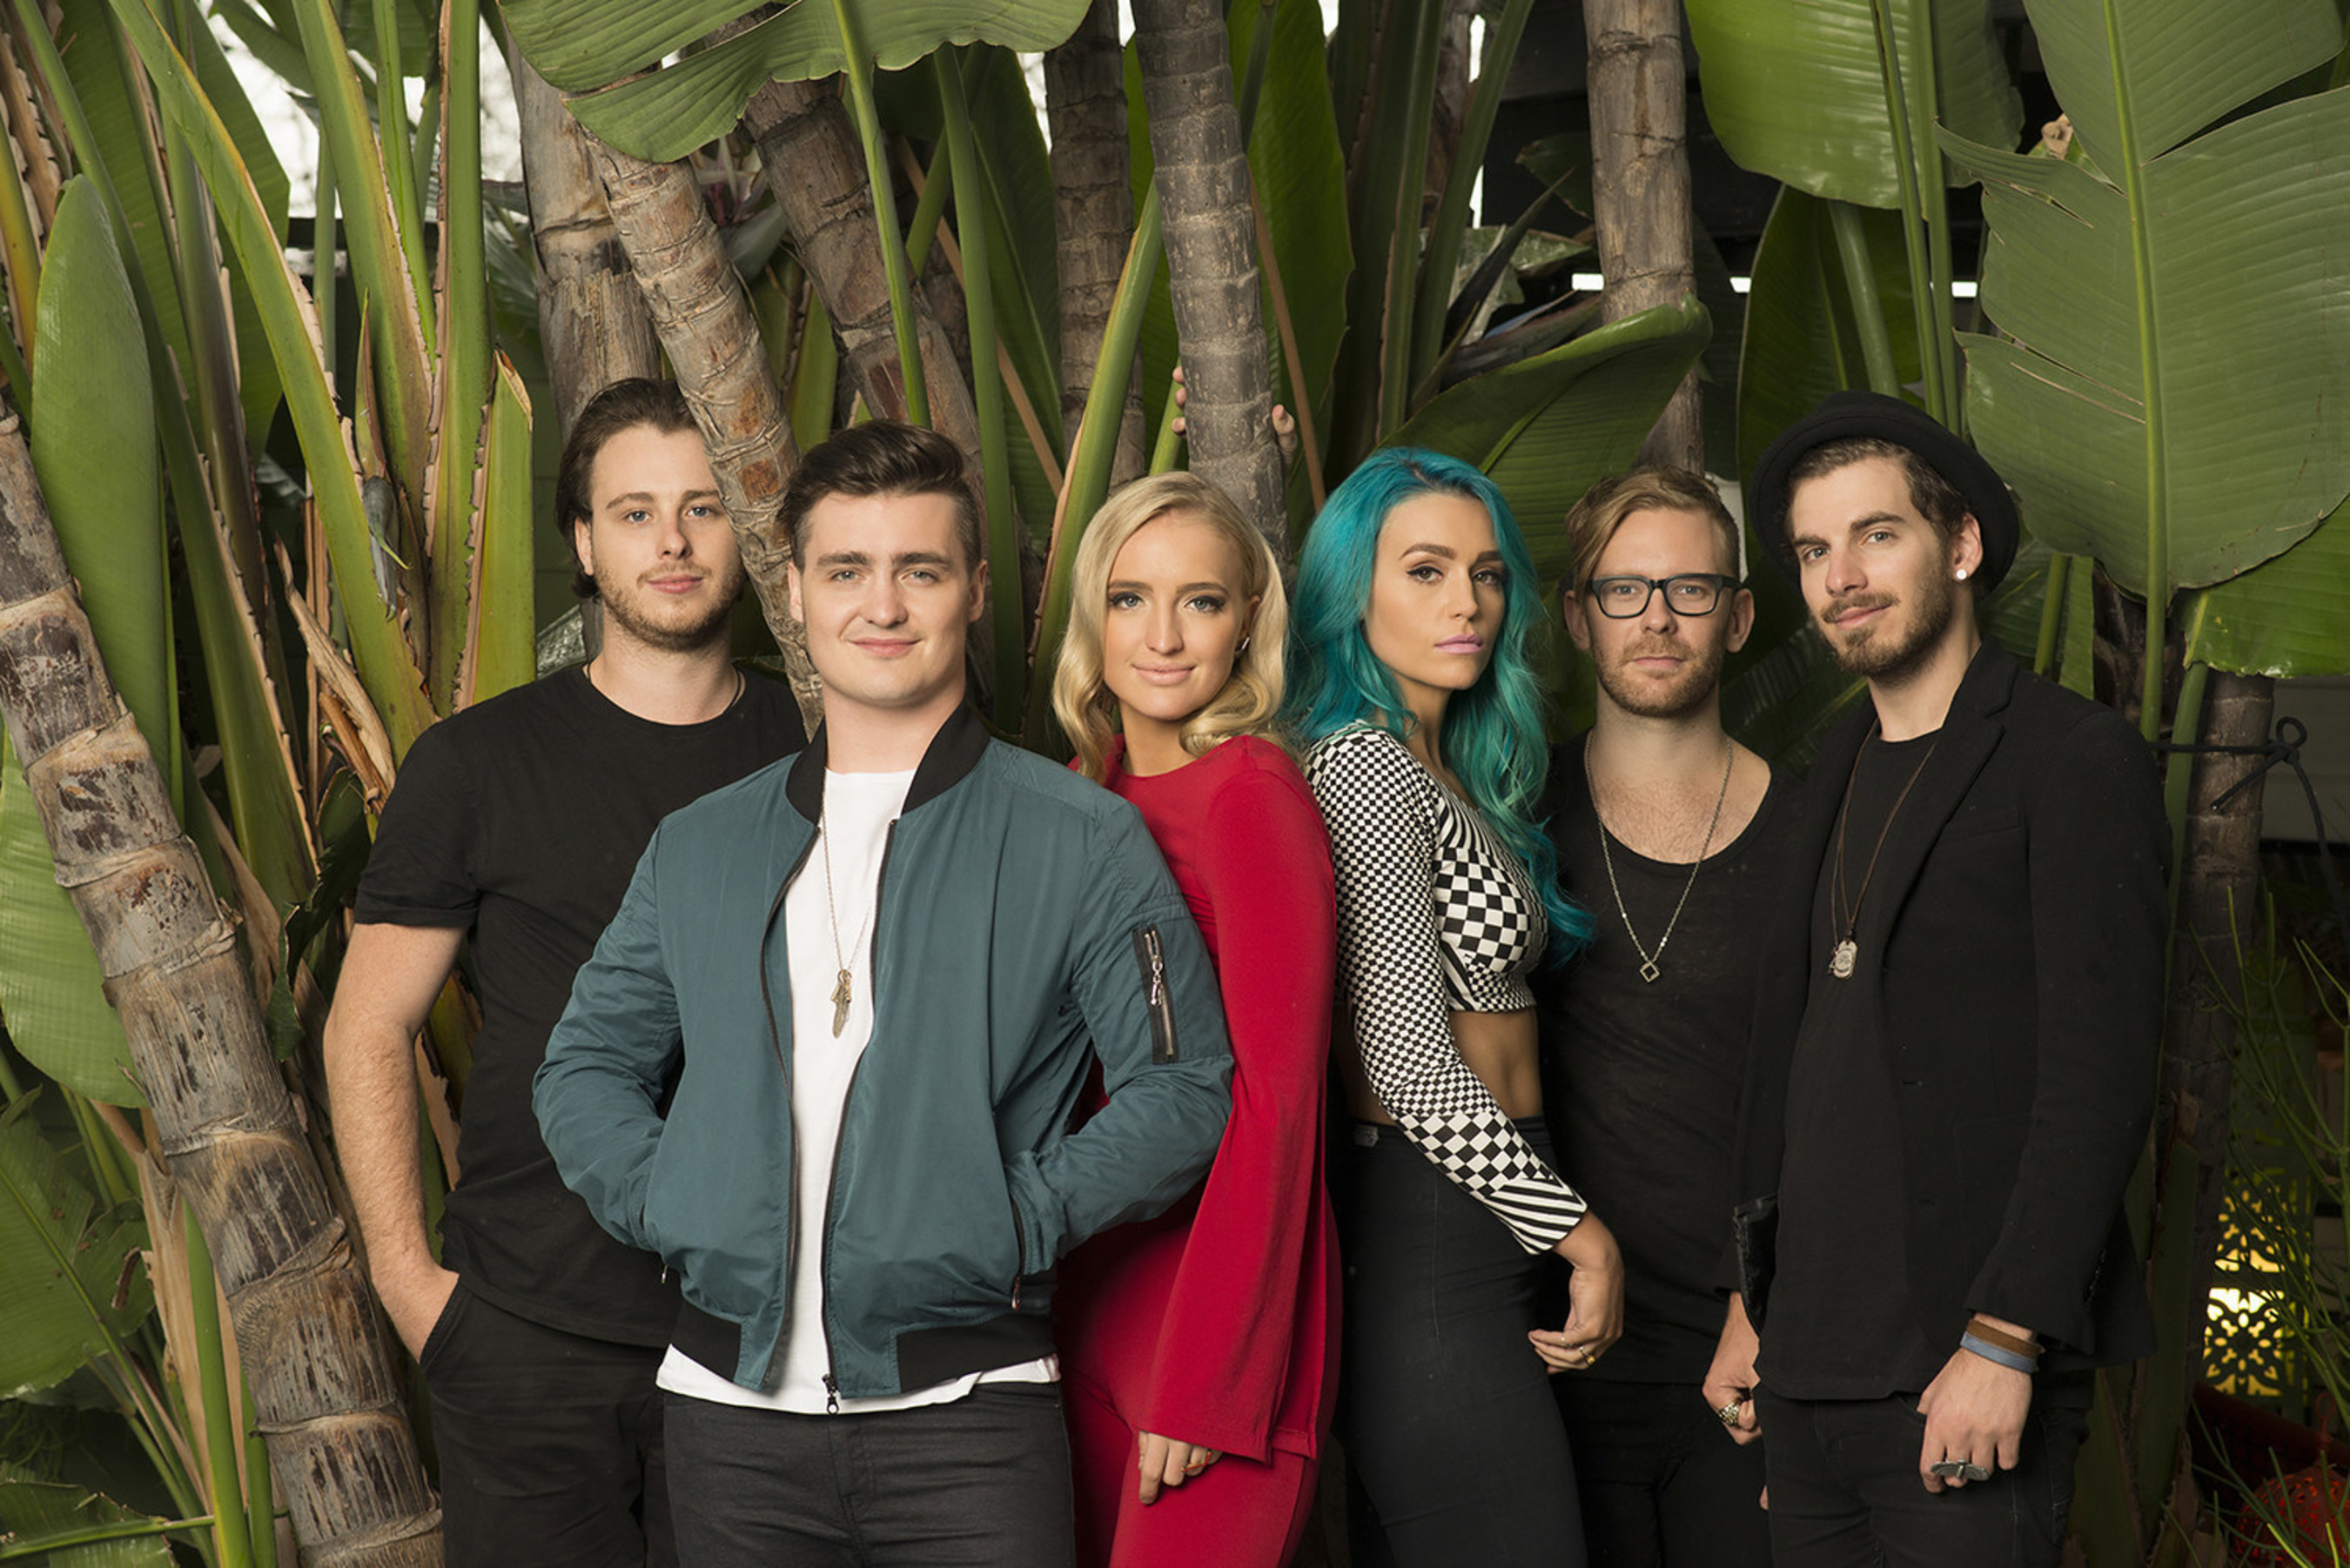 Sheppard is one of bands featured in Hard Rock Hotels & Casinos' in-room playlist as a part of the brand's free music amenity program, The Sound of Your Stay.